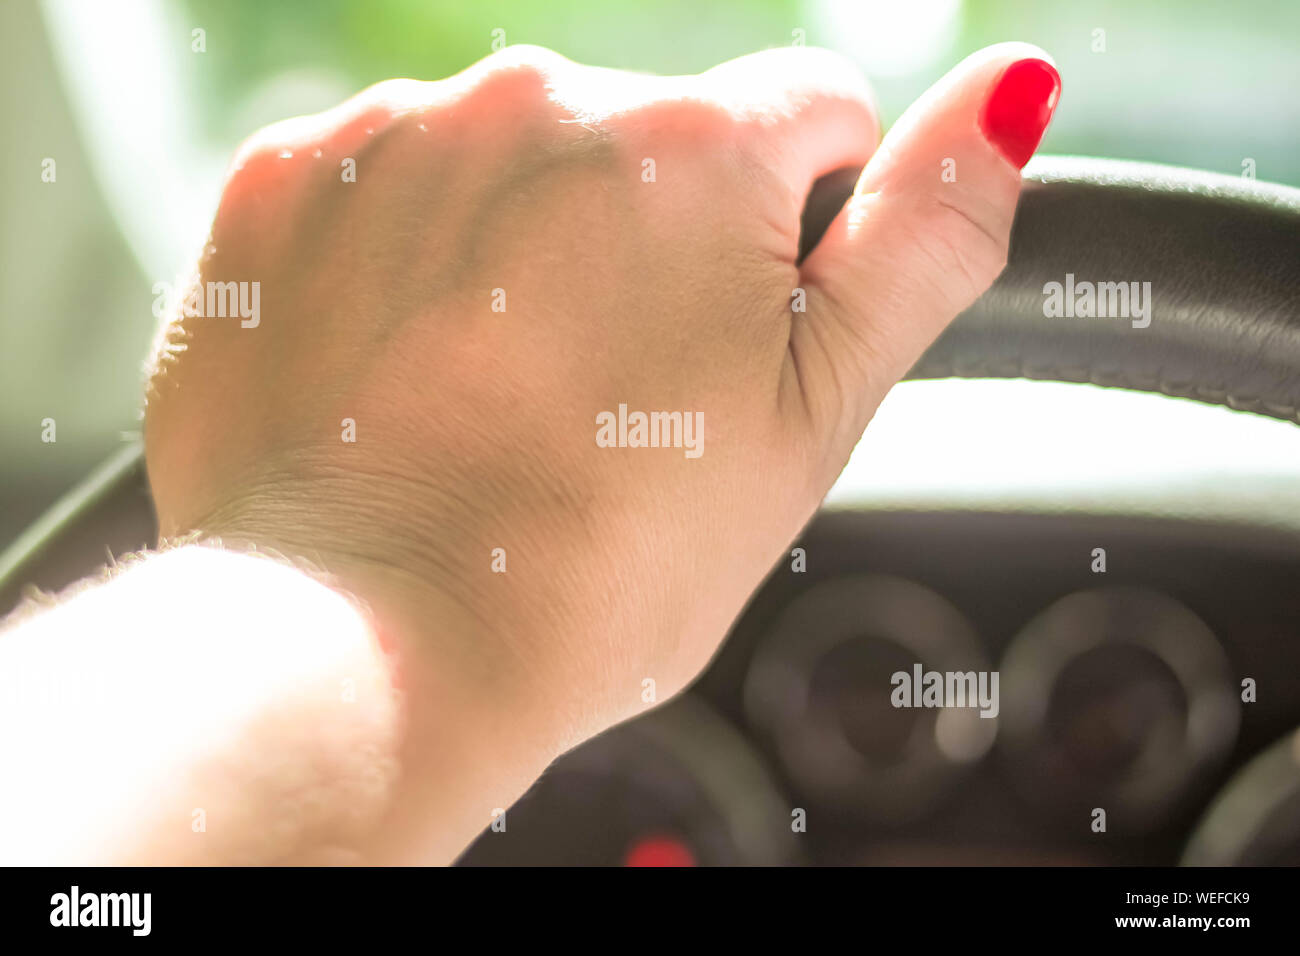 Woman driving a car with one hand holding the steering wheel with natural background rare window view. Selective soft focus. Text copy space. Driving Stock Photo